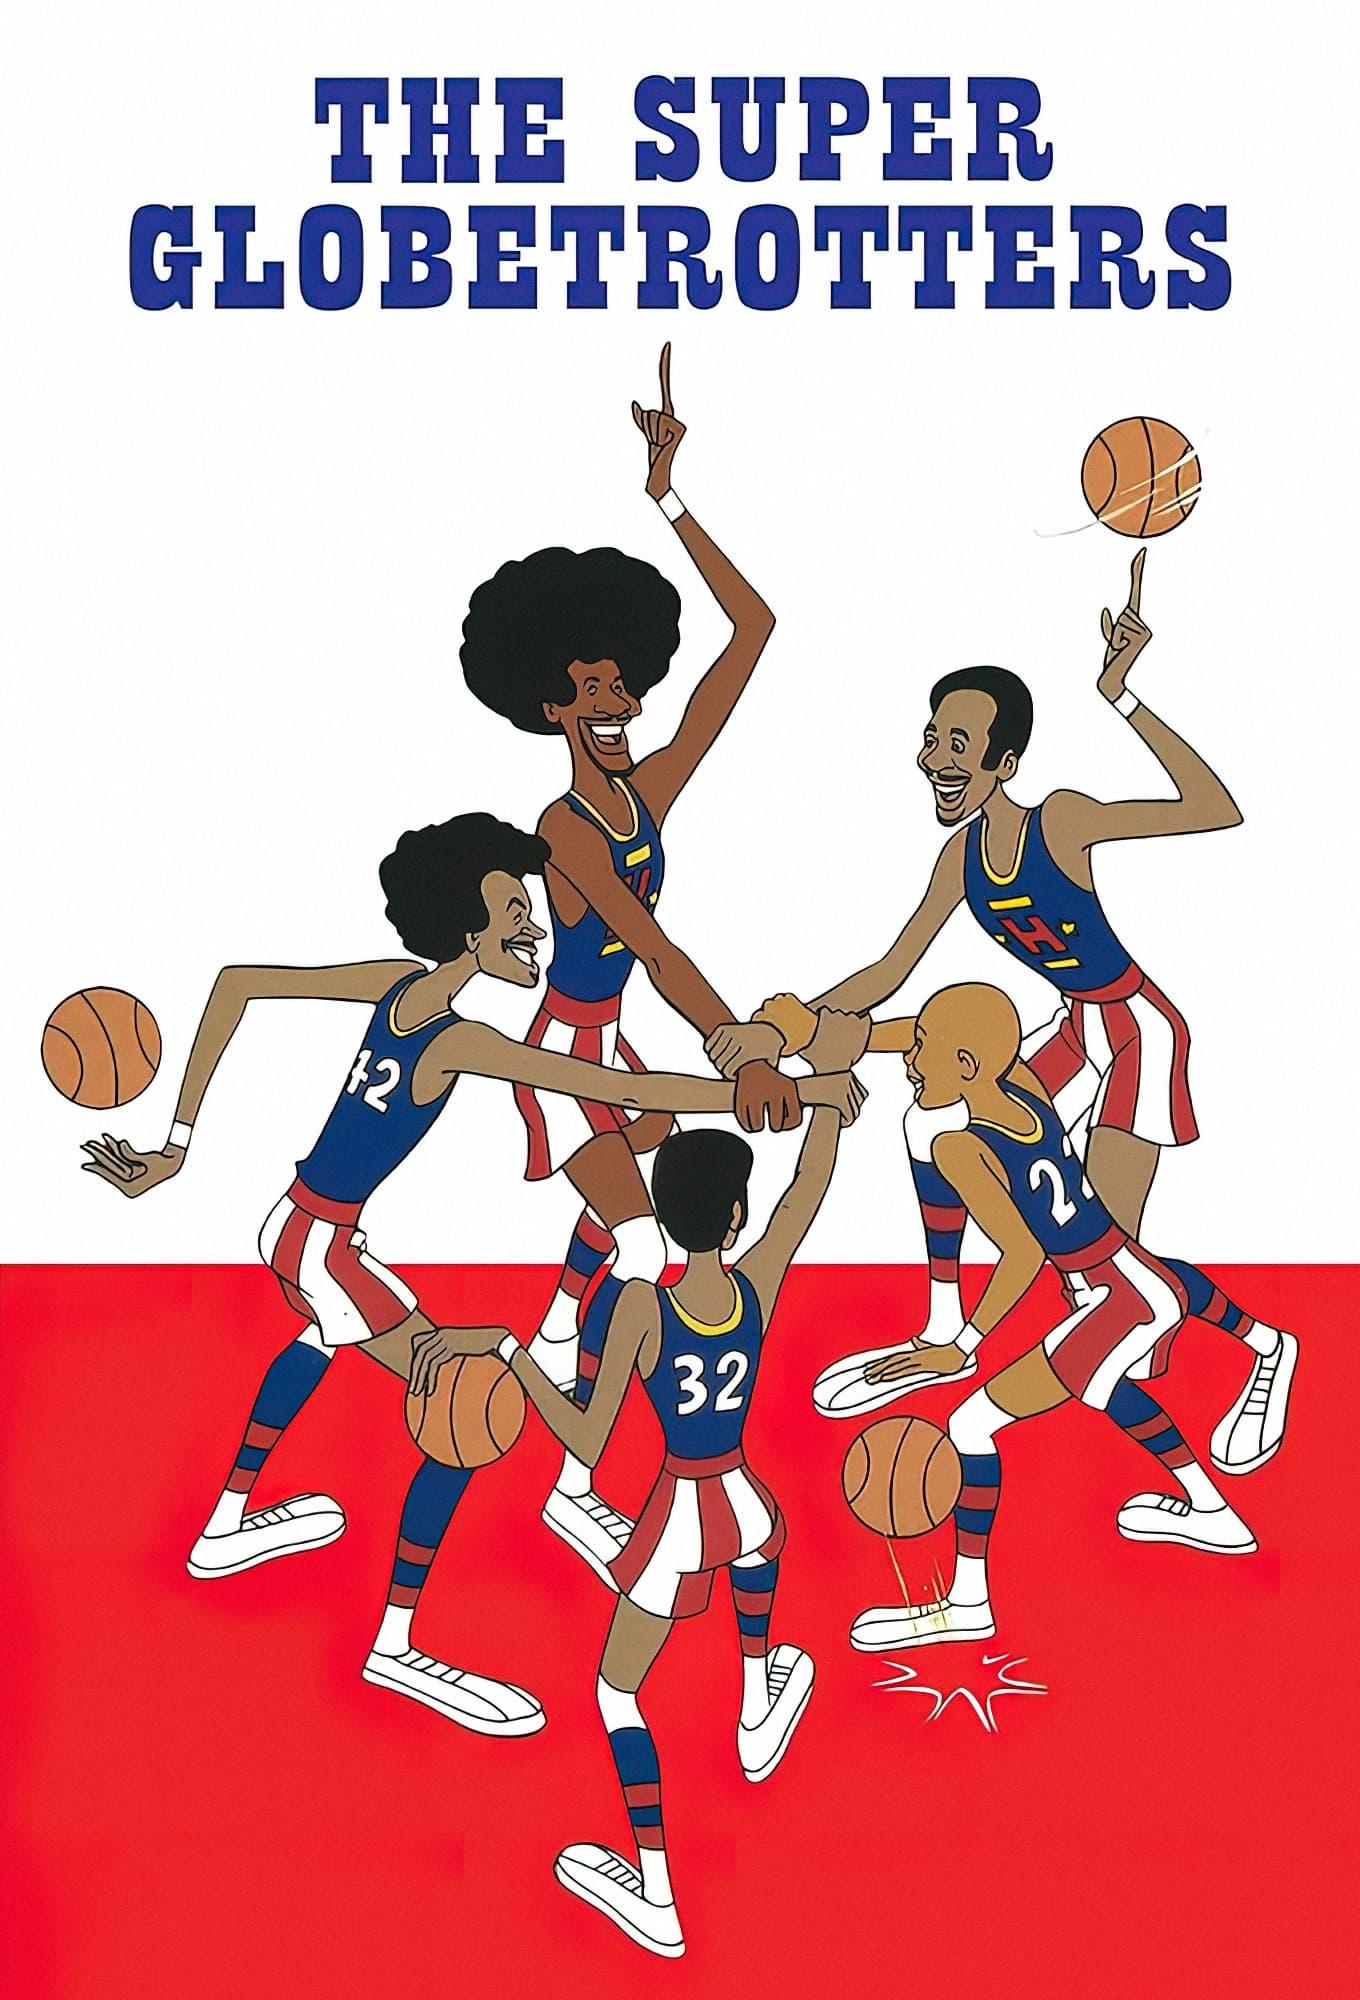 The Super Globetrotters poster